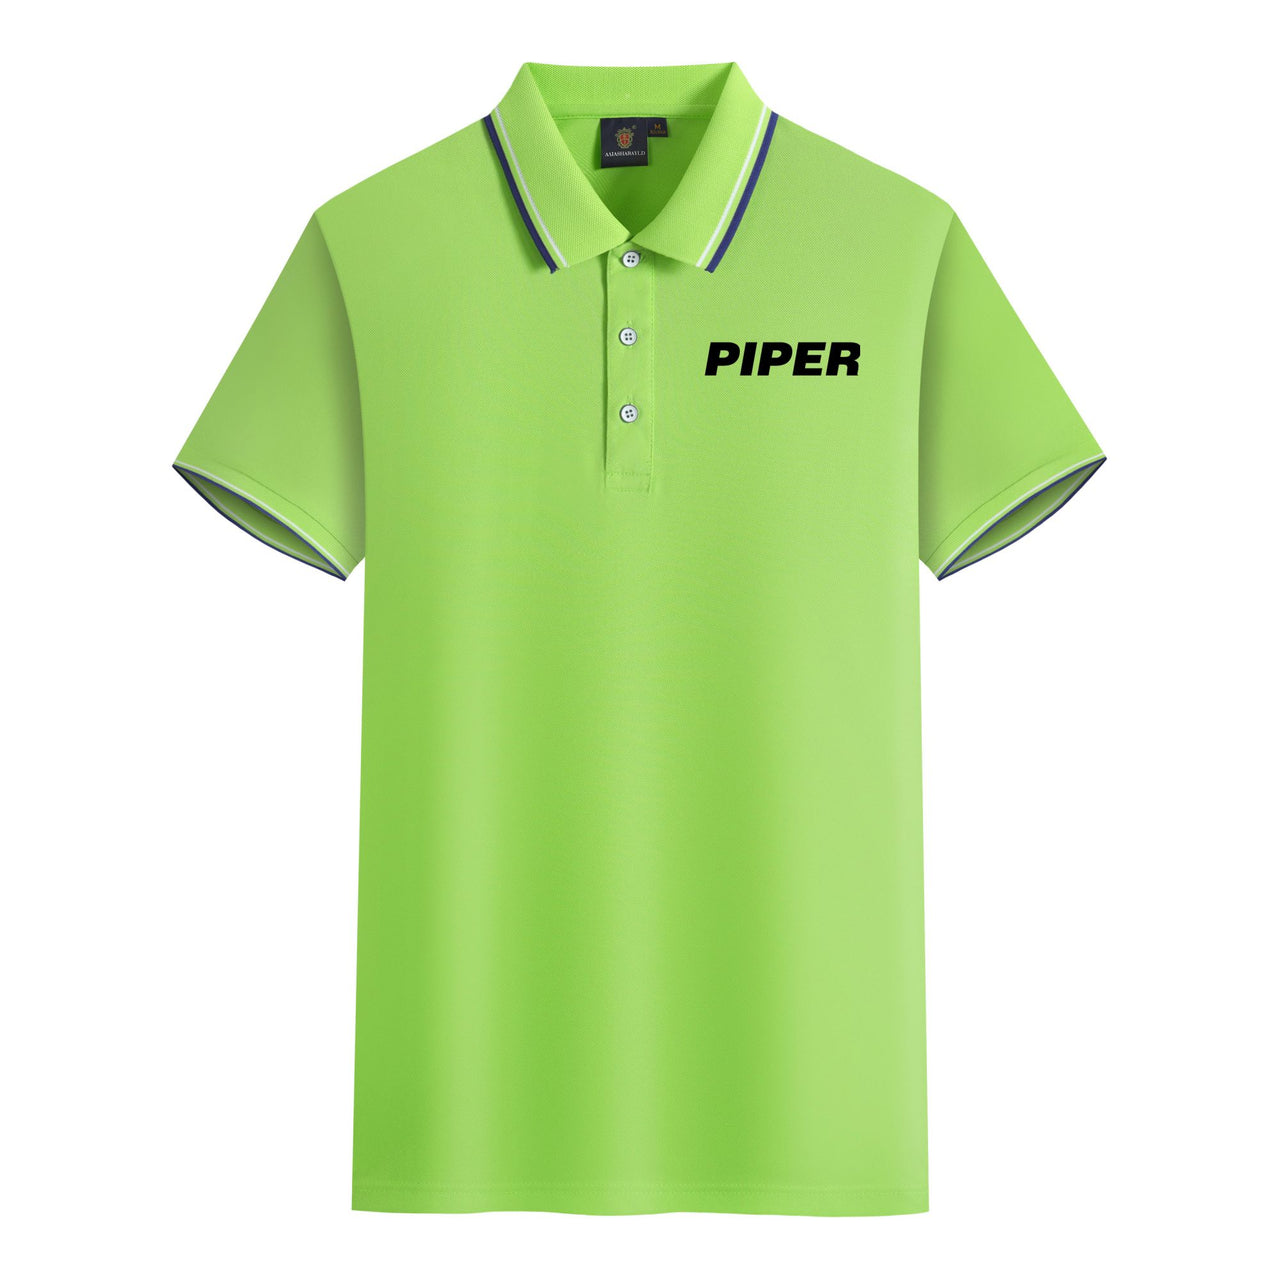 Piper & Text Designed Stylish Polo T-Shirts